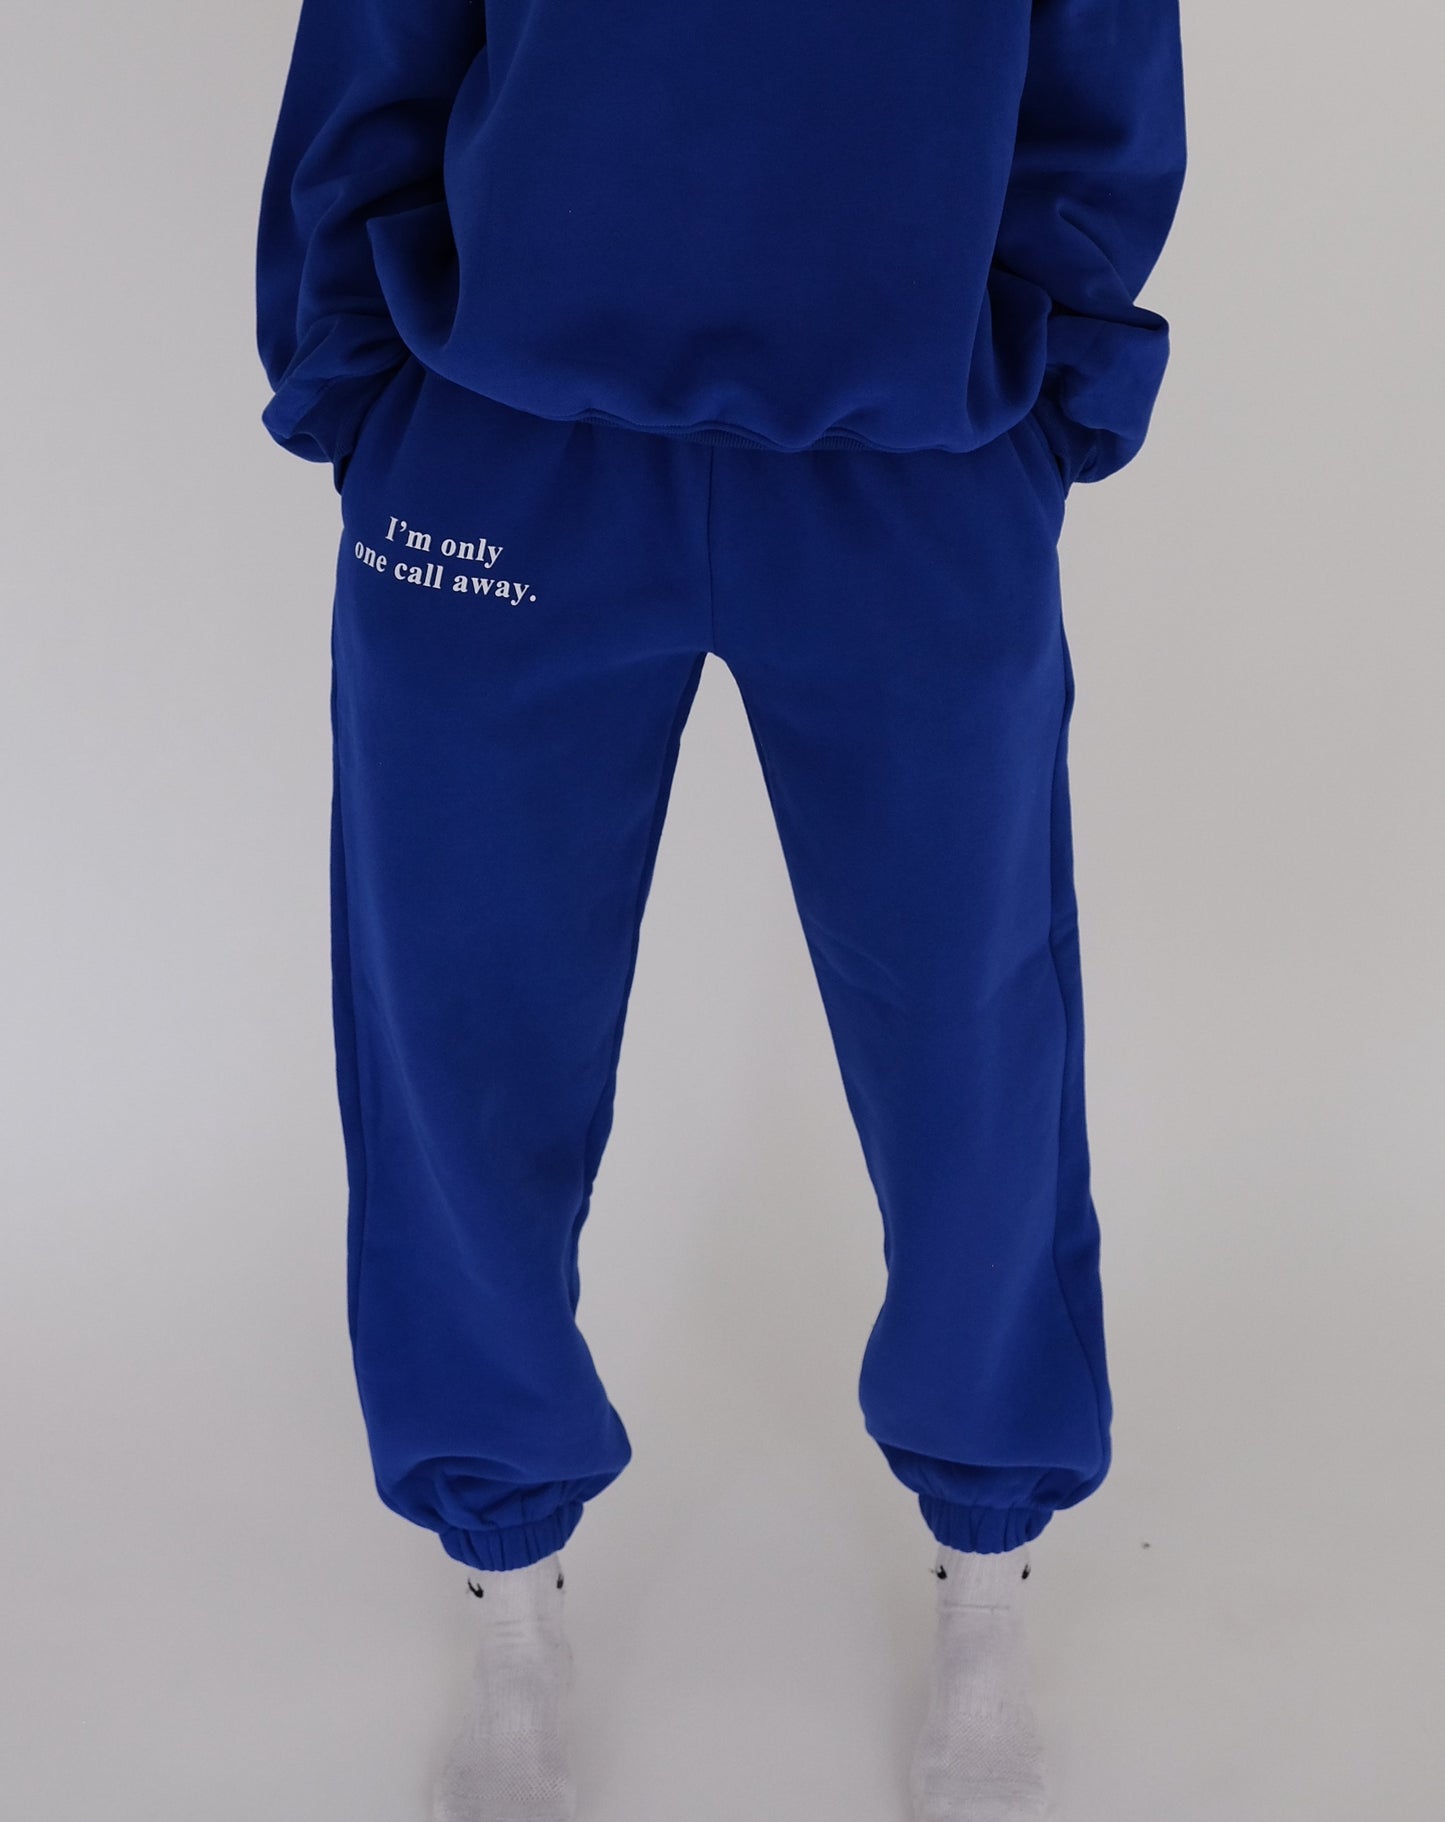 Prevention Sweatpants - Royal Blue – The Happy Camp3r